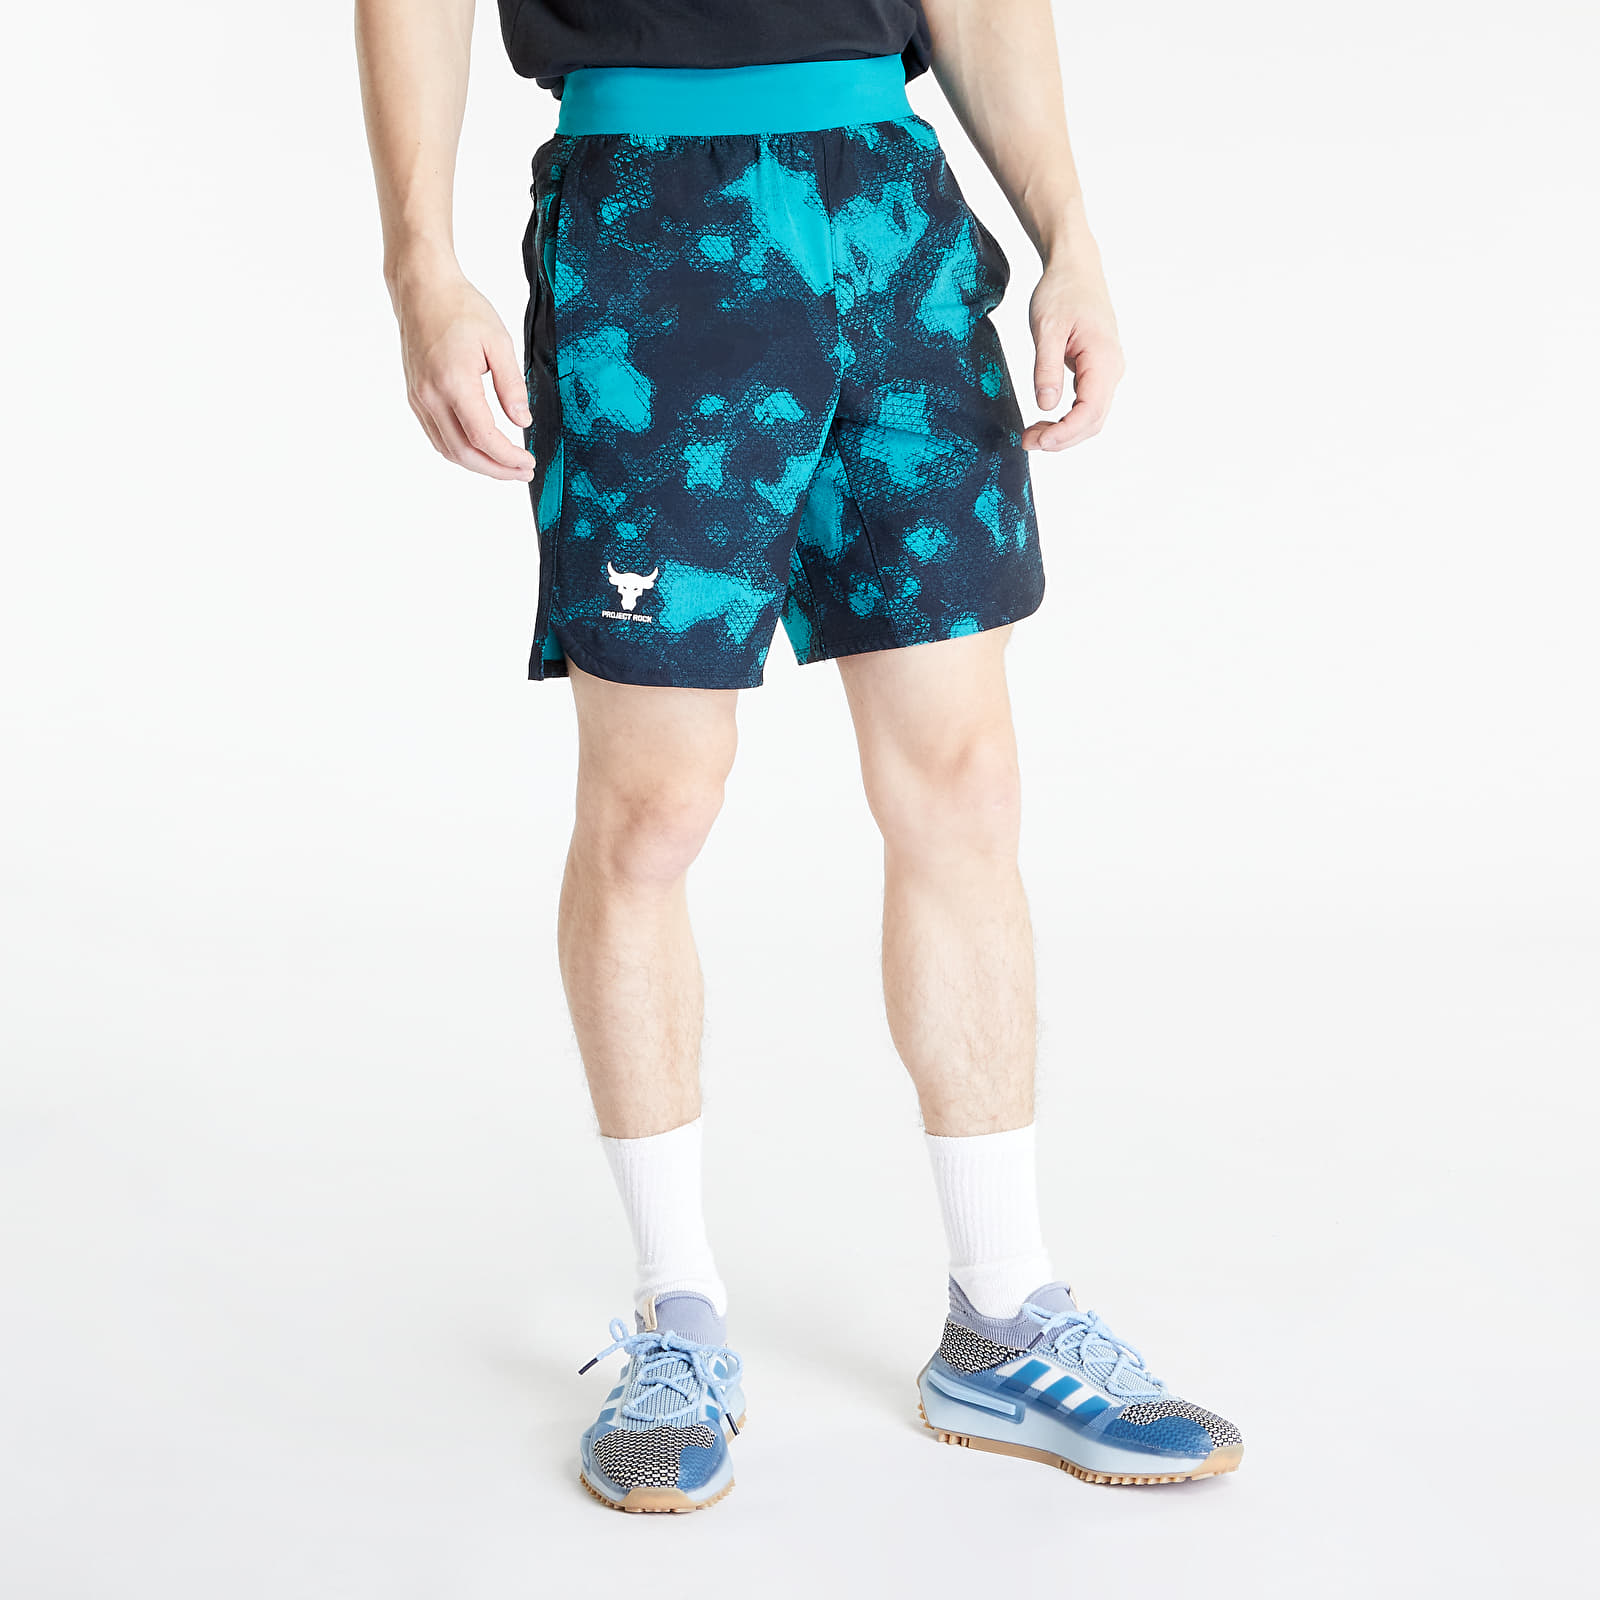 Shorts Under Armour Project Rock Woven Shorts Midnight Navy/ White